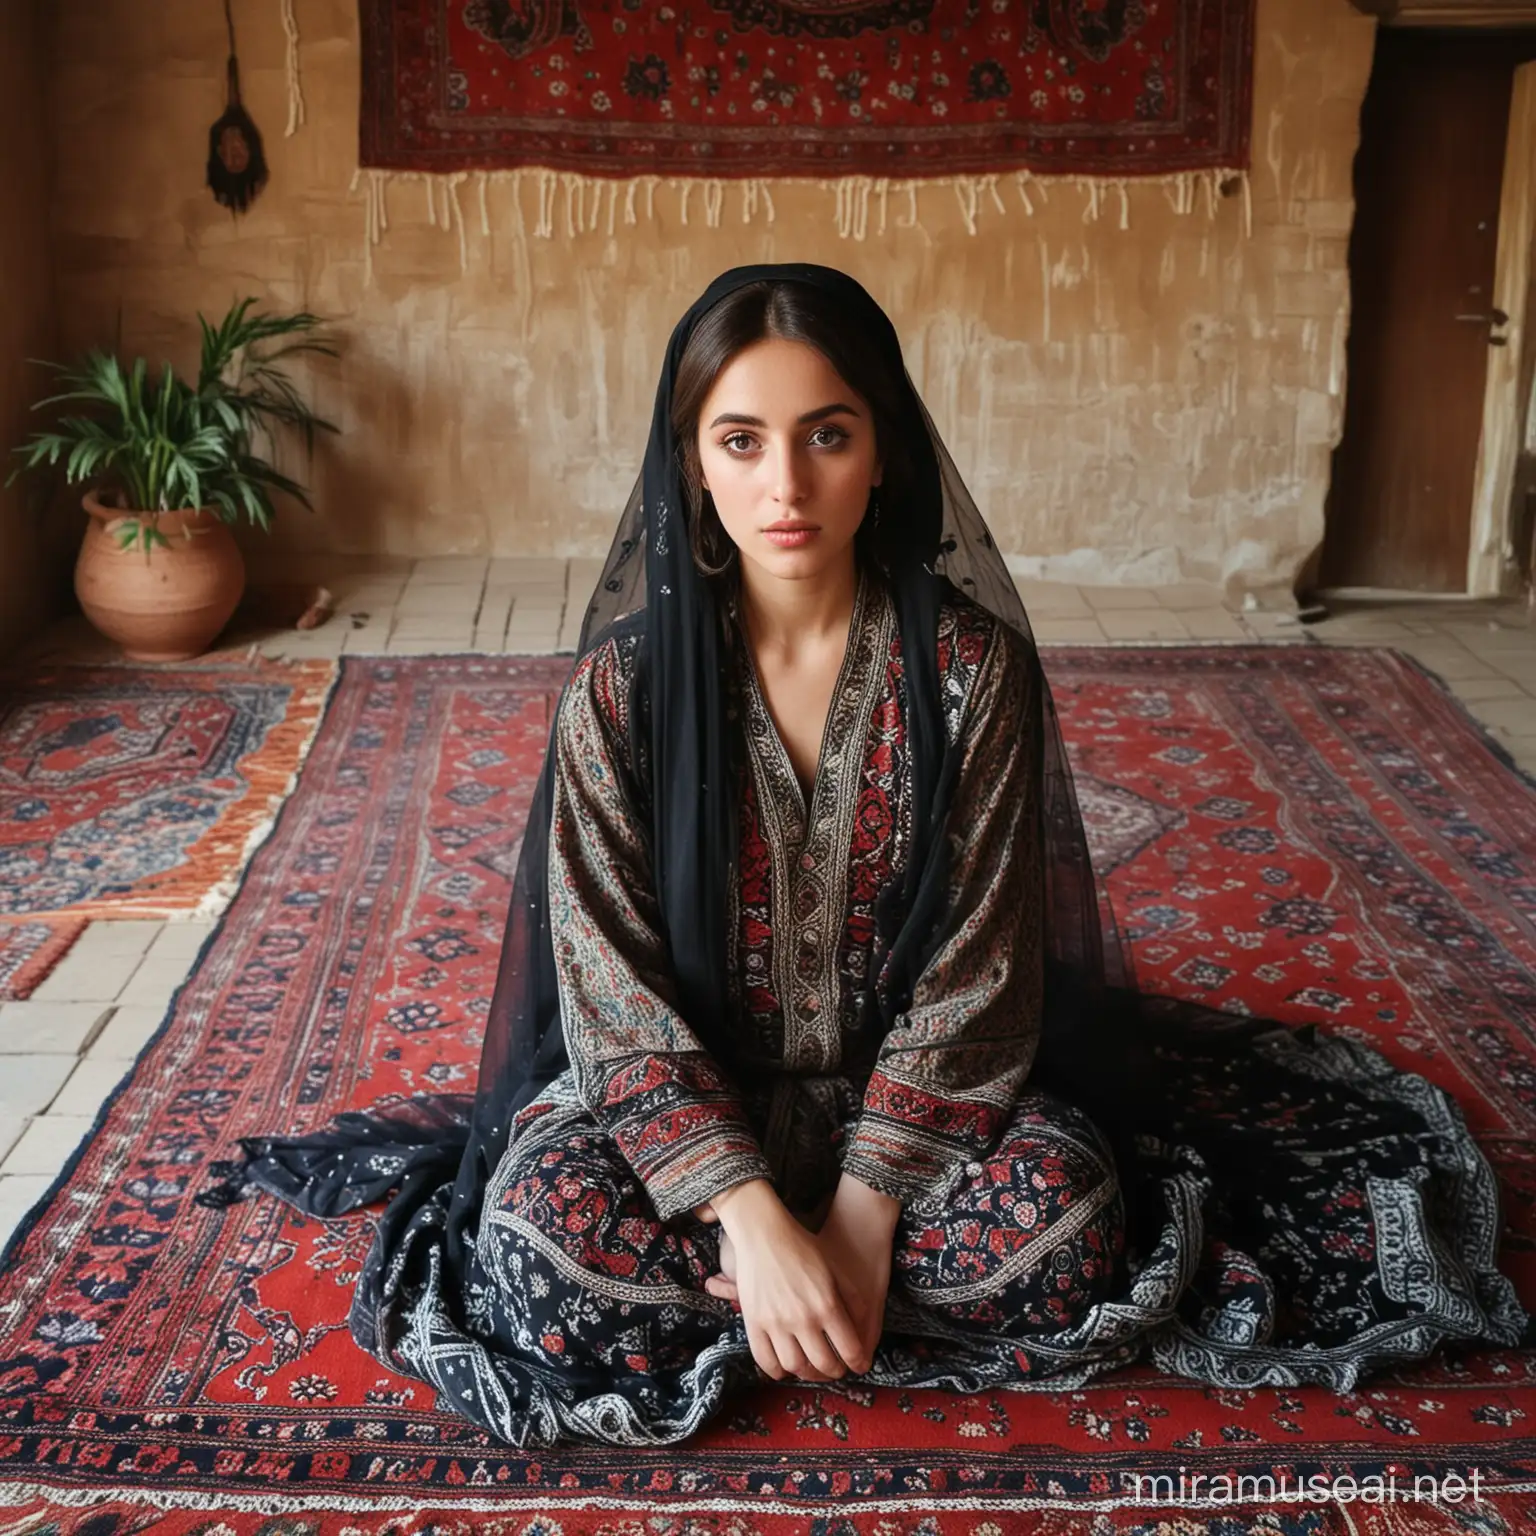 Veiled Girl Sitting on Afghan Rug in Traditional Home Setting